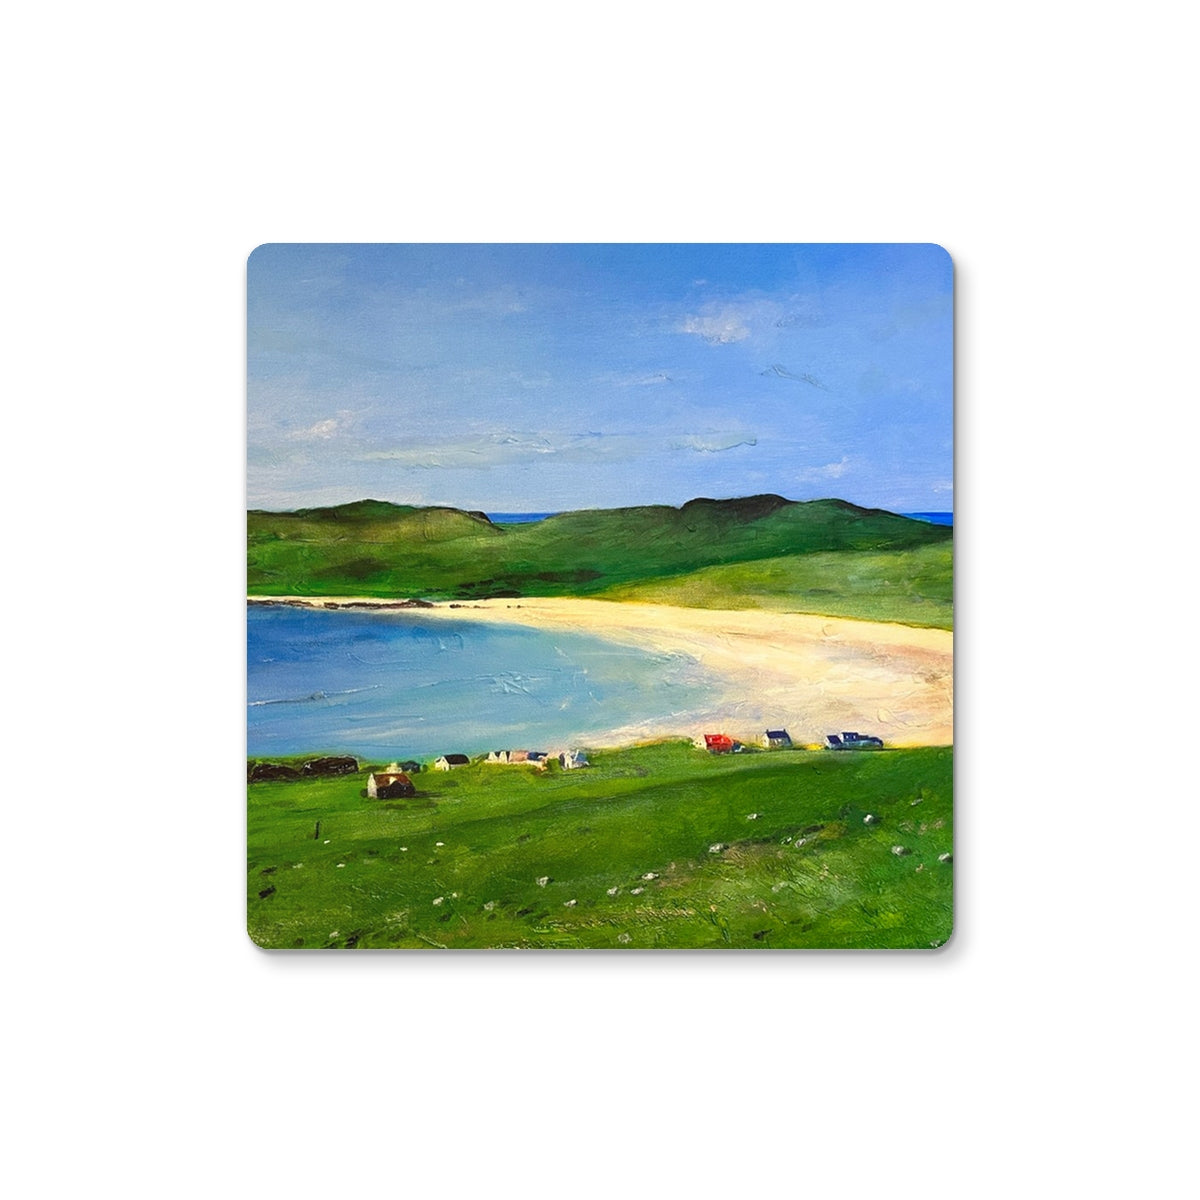 Balephuil Beach Tiree Art Gifts Coaster-Coasters-Hebridean Islands Art Gallery-6 Coasters-Paintings, Prints, Homeware, Art Gifts From Scotland By Scottish Artist Kevin Hunter